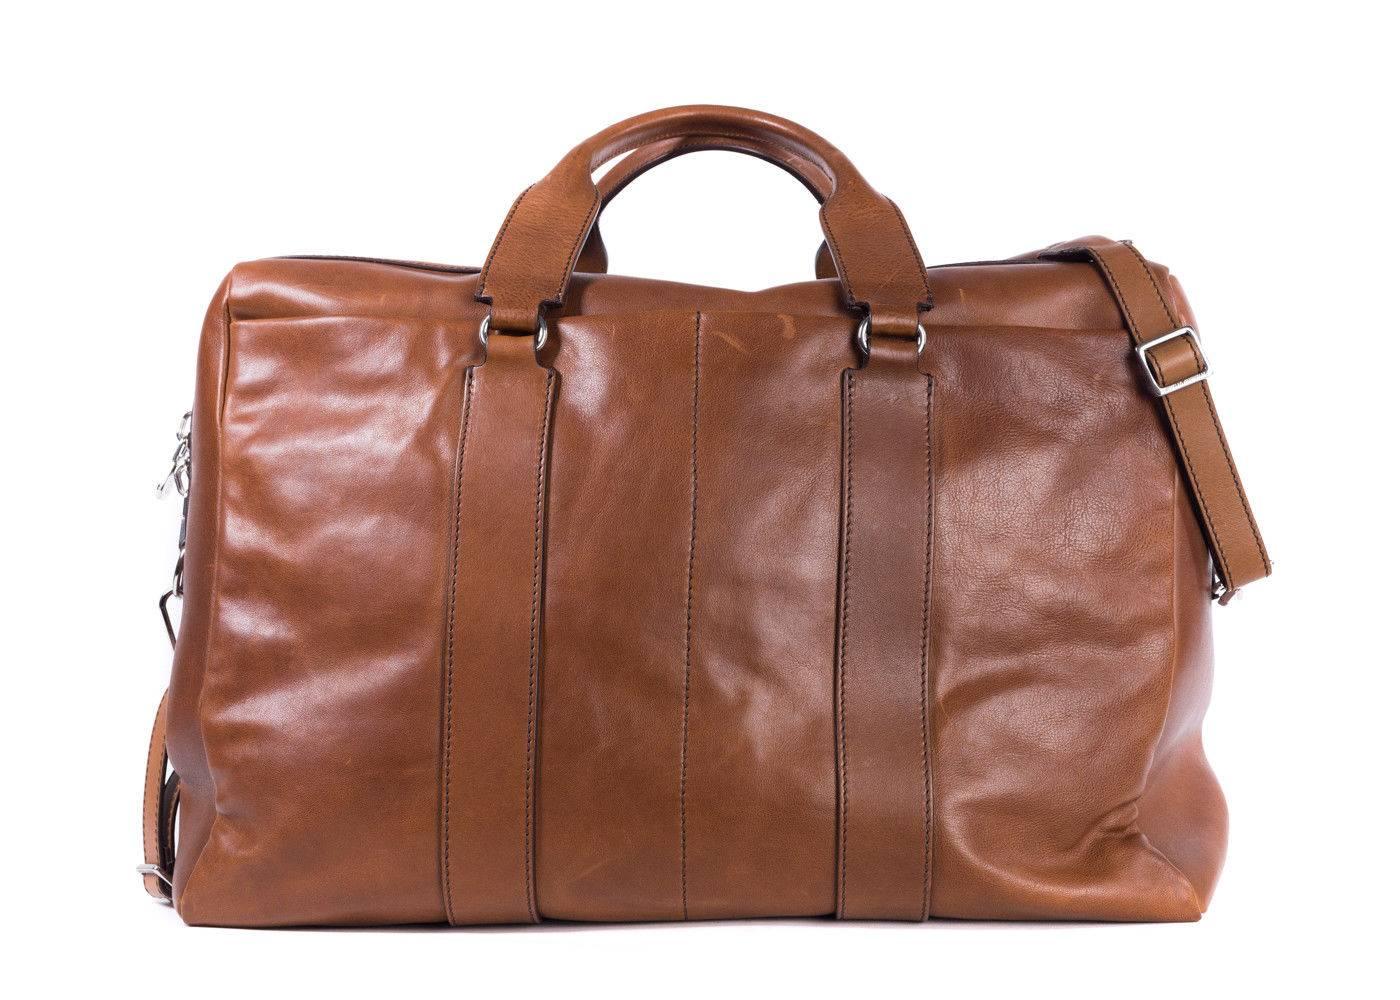 Brand New Brunello Cucinelli Travel Bag
Dust Bag Included
Retails in Stores & Online for $3995
Dimensions: 21